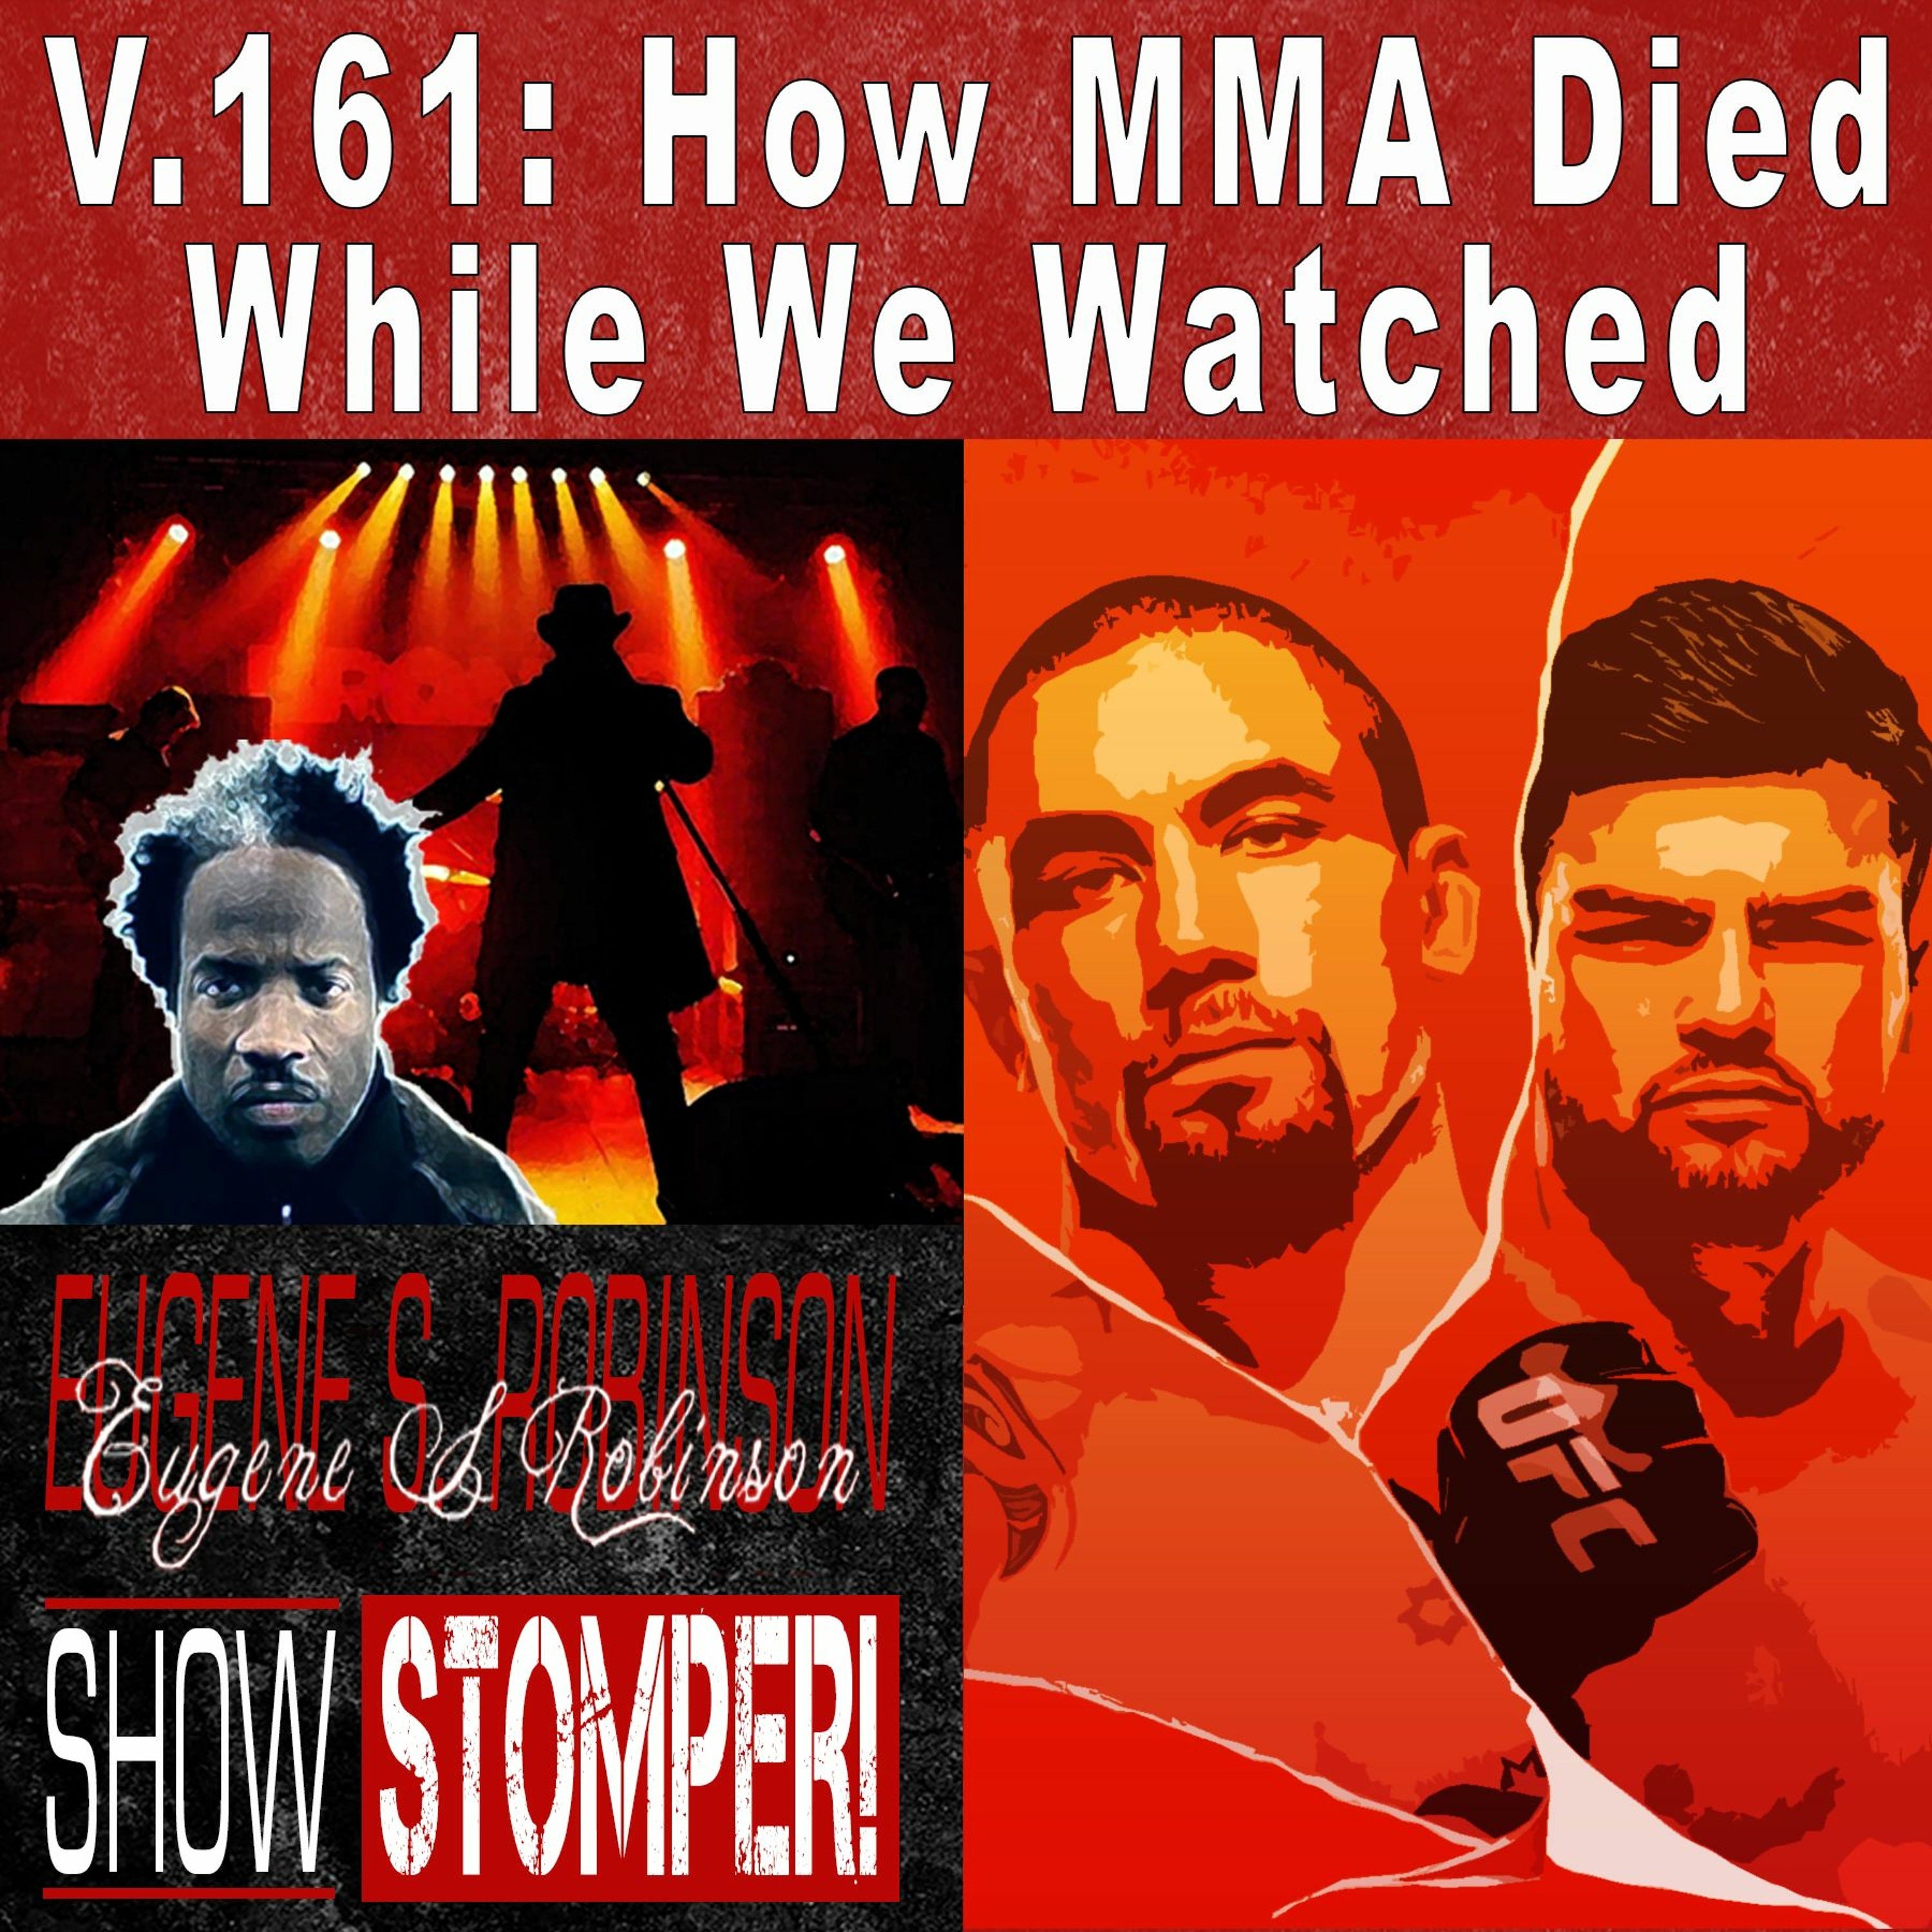 V.161: How MMA Died While We Watched on The Eugene S. Robinson Show Stomper!